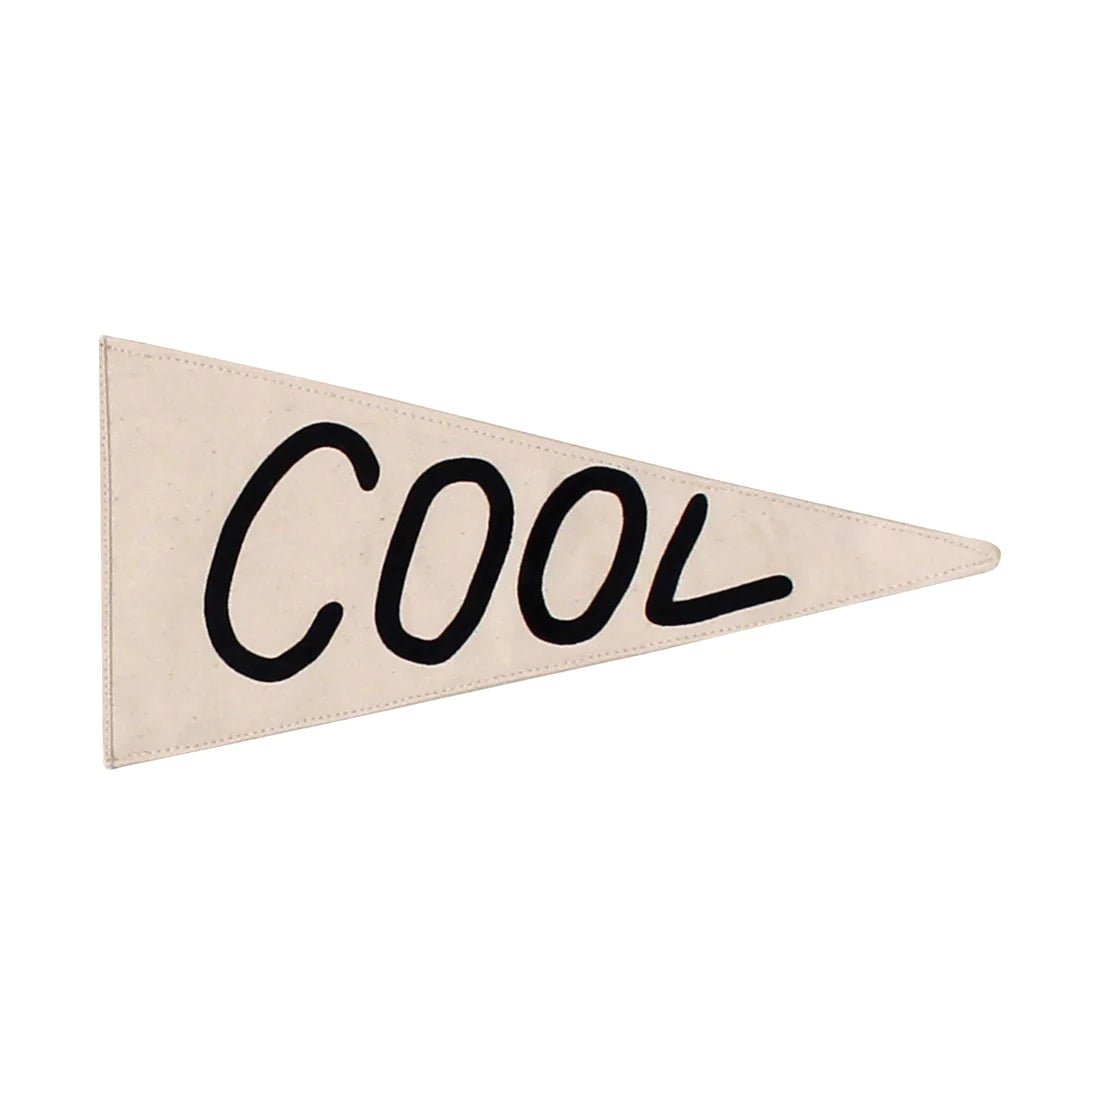 Cool Pennant by Imani Collective - Maude Kids Decor